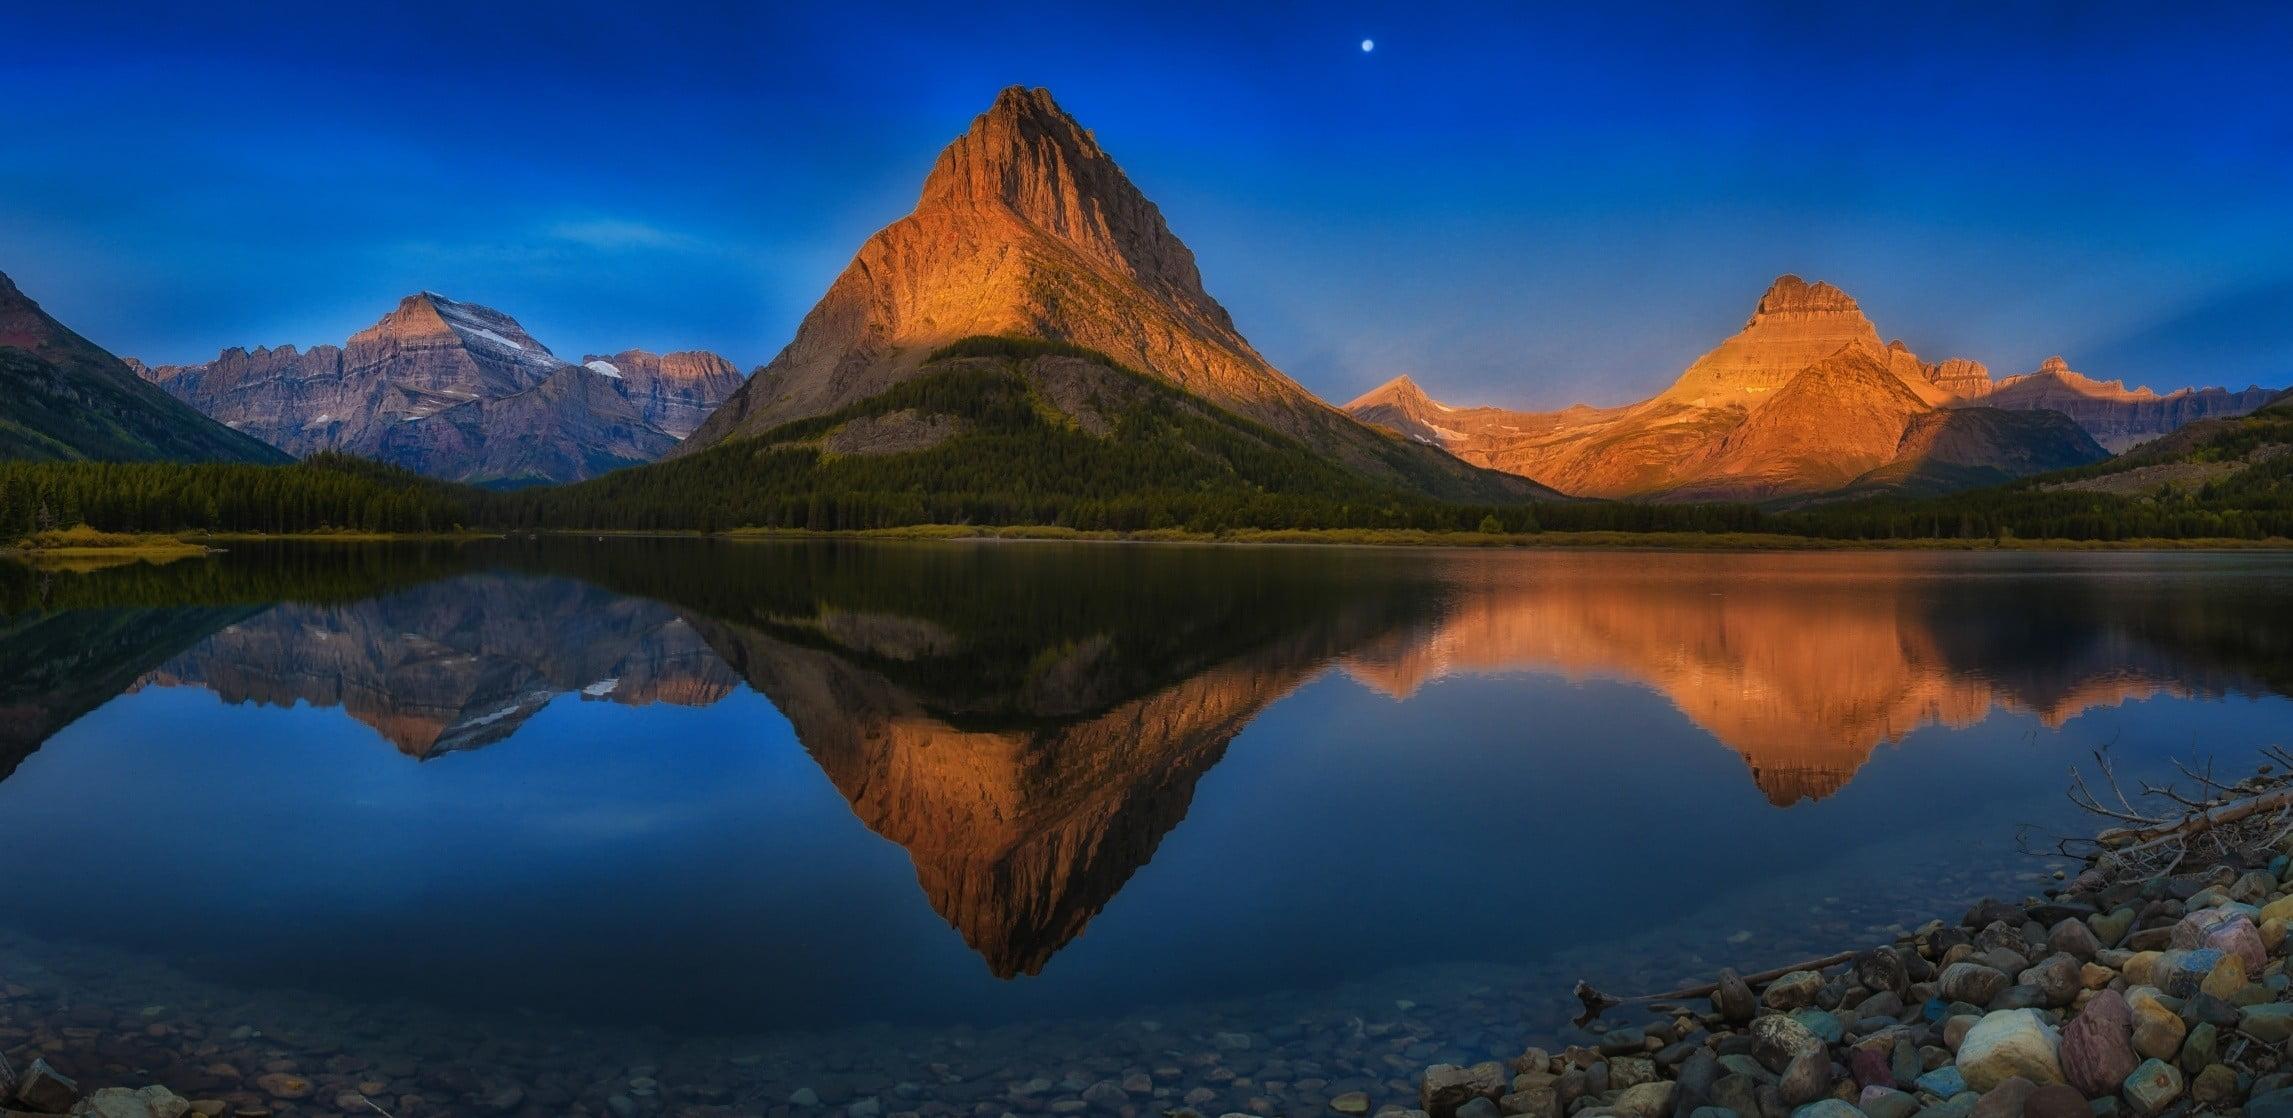 Reflection of brown mountain on body of water, lake, mountains